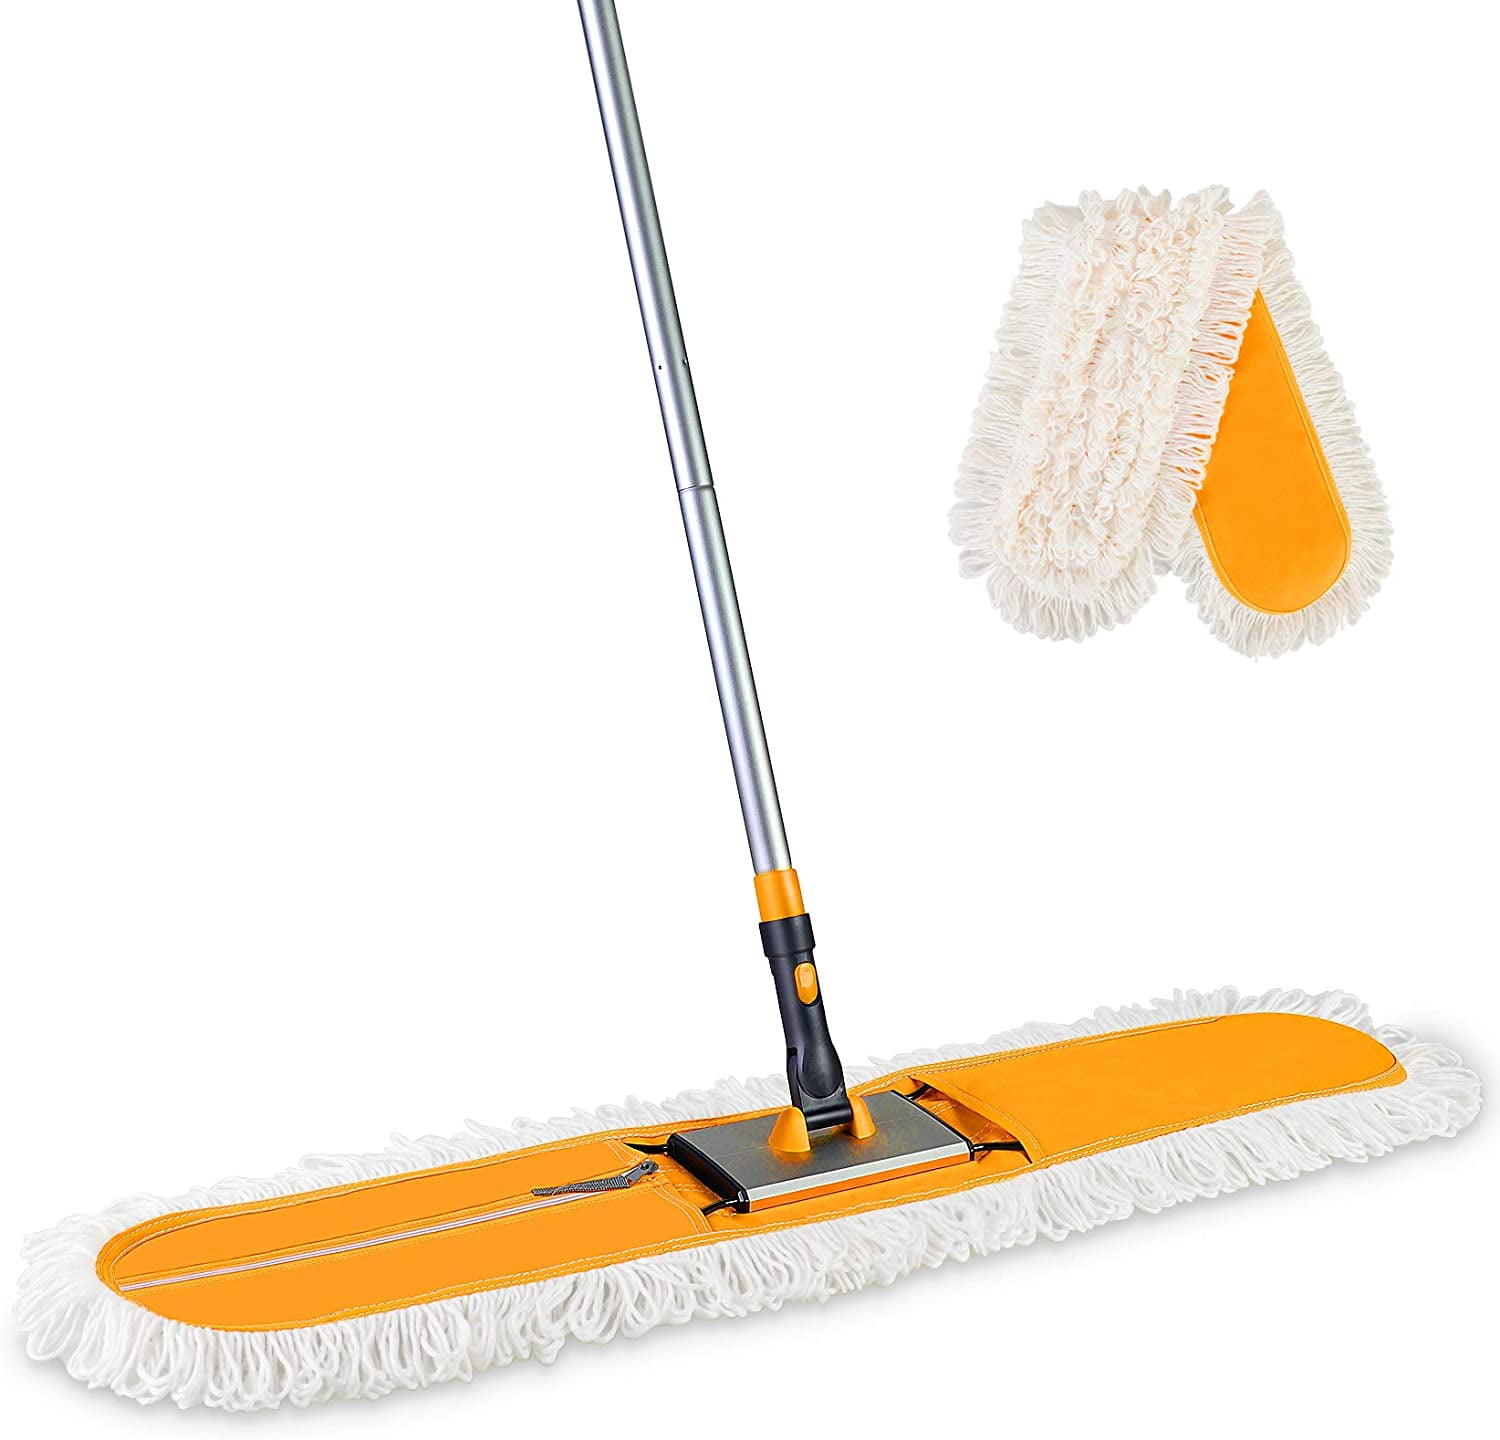 Large mops for large floors